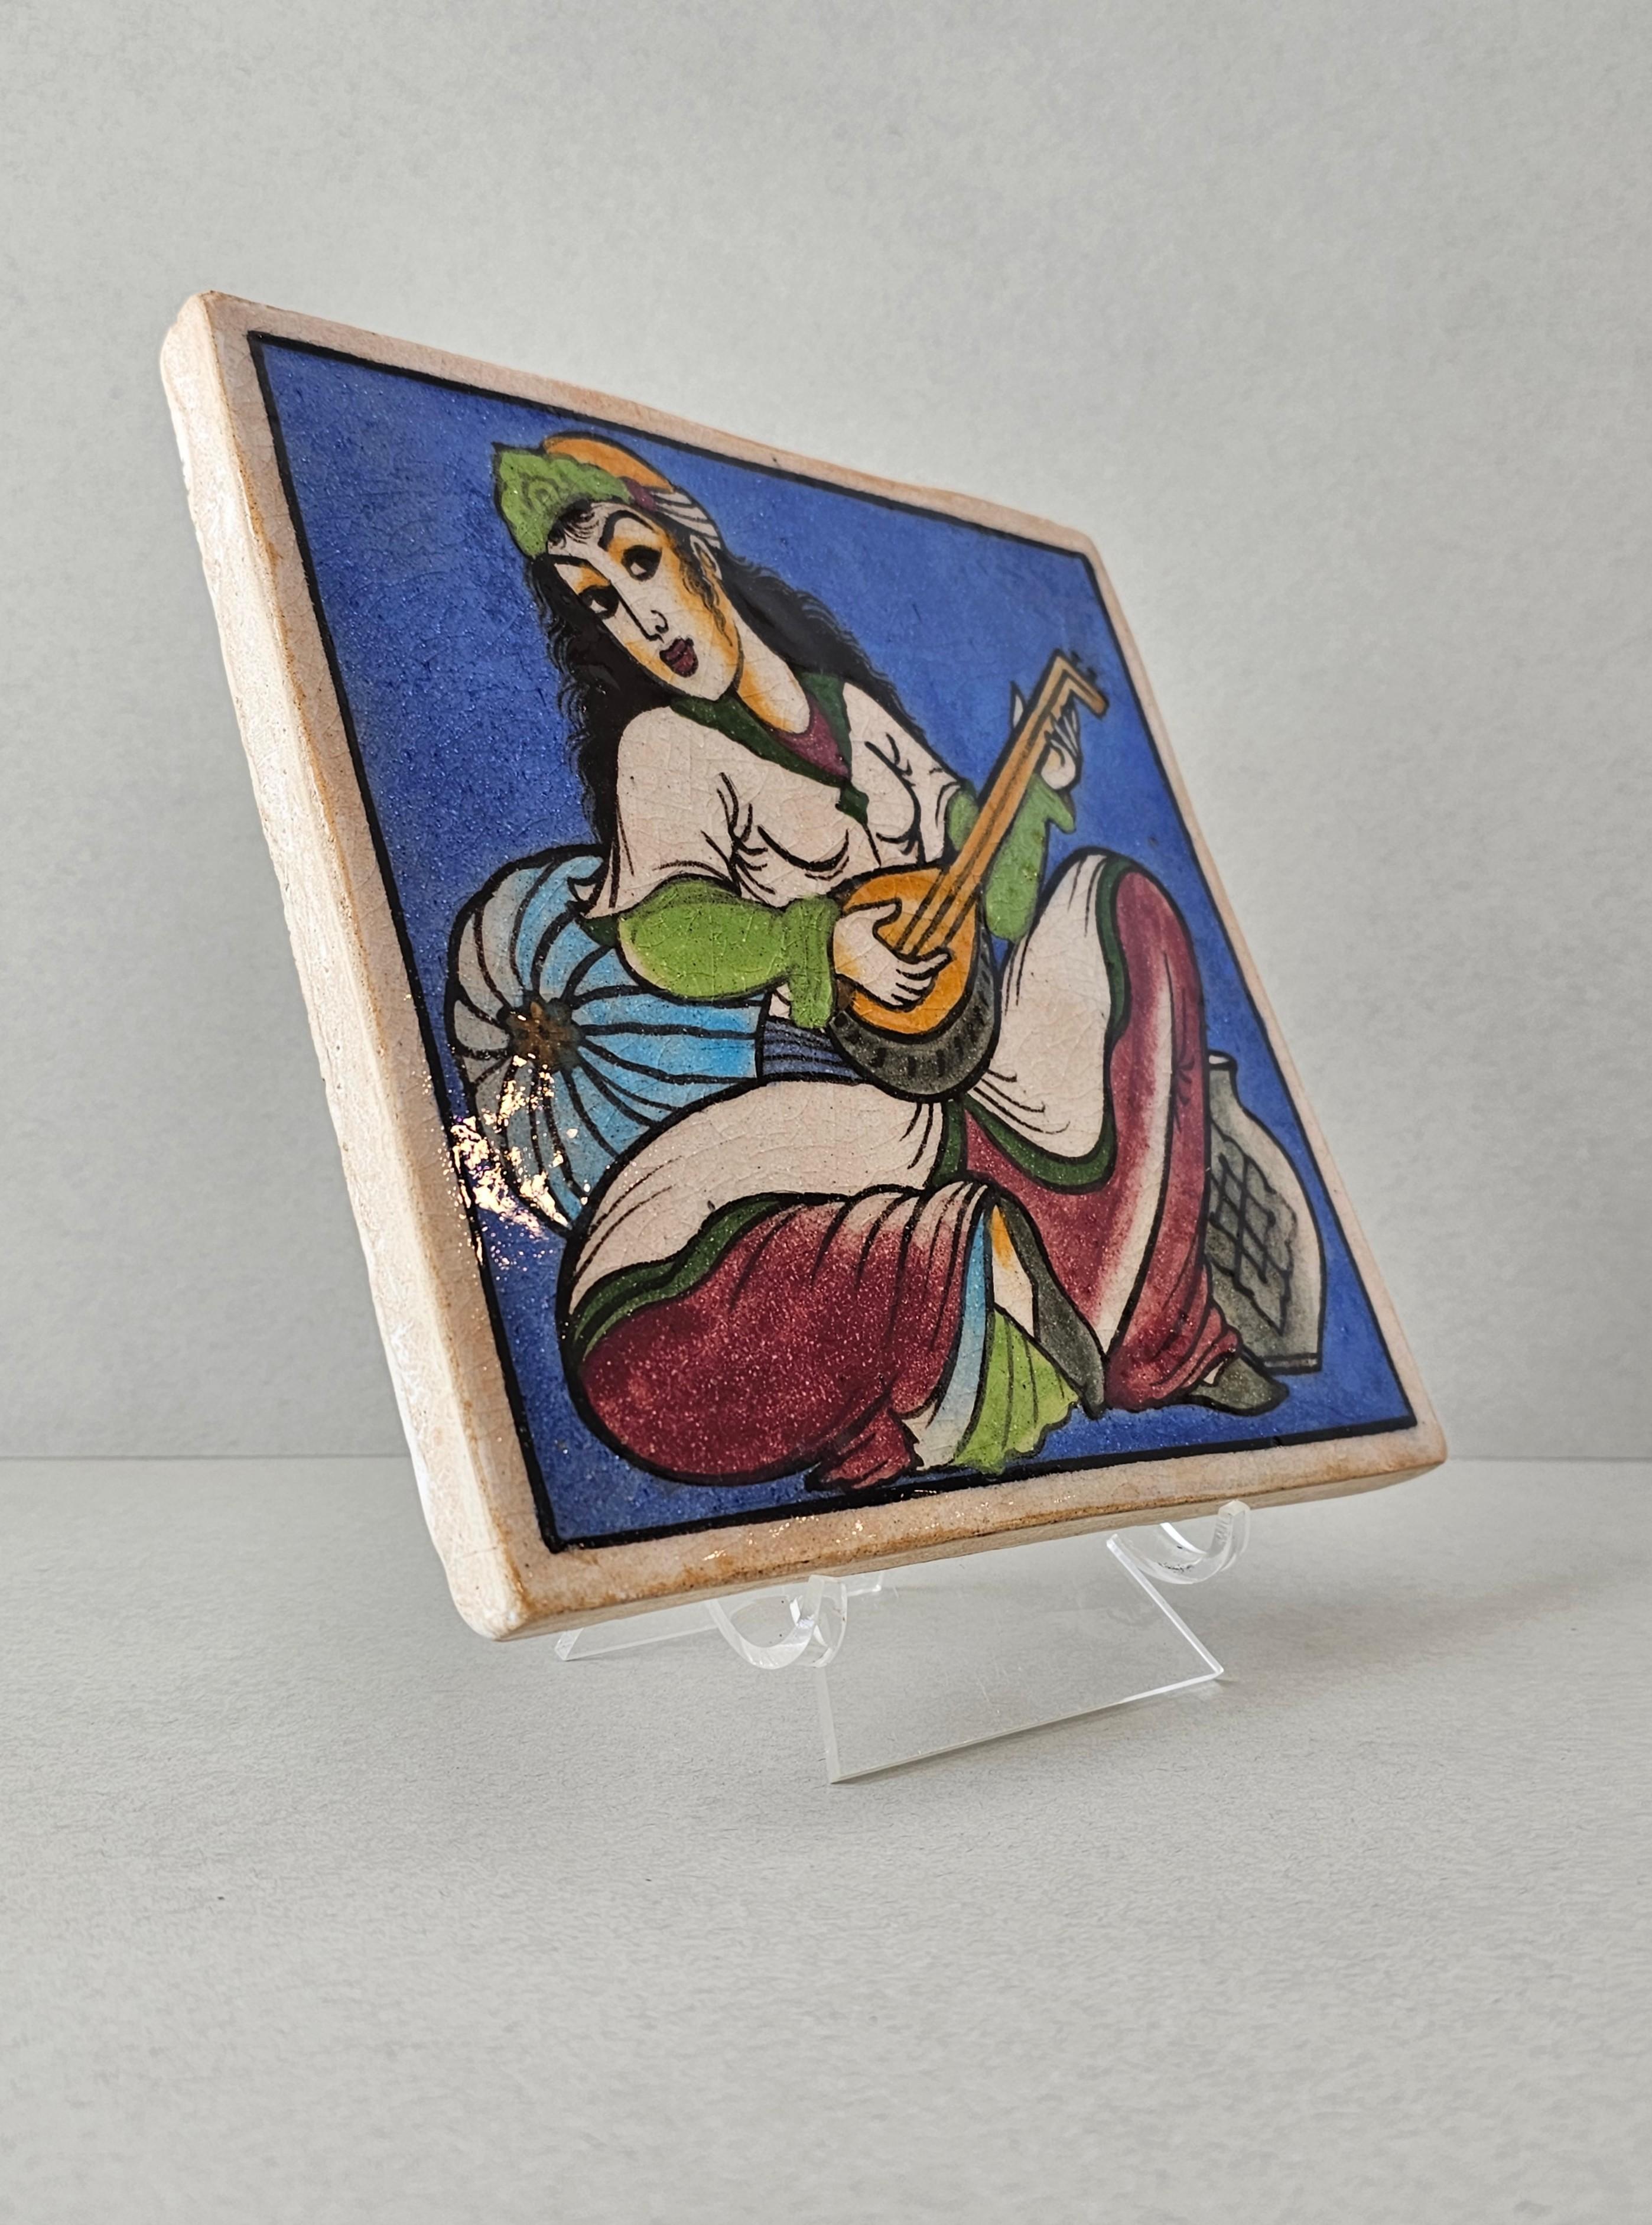 Indo-Persian Hand Painted Ceramic Wall Tile  For Sale 2